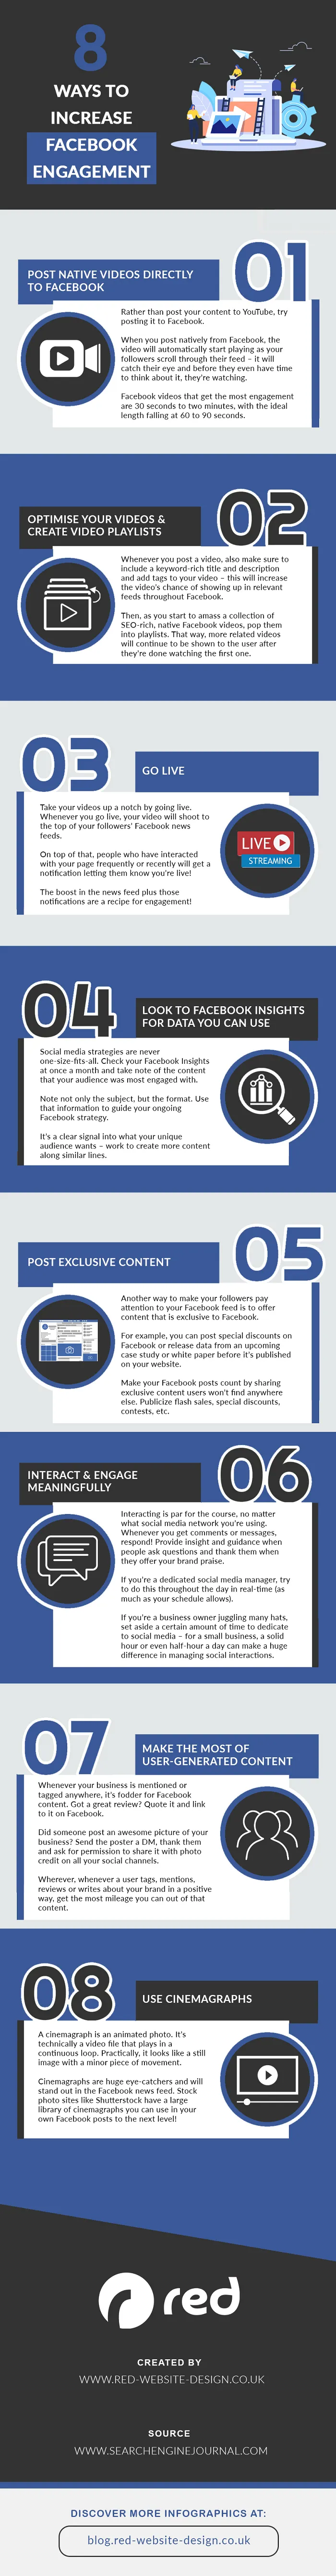 8 Ways to Boost Facebook Page Engagement Infographic